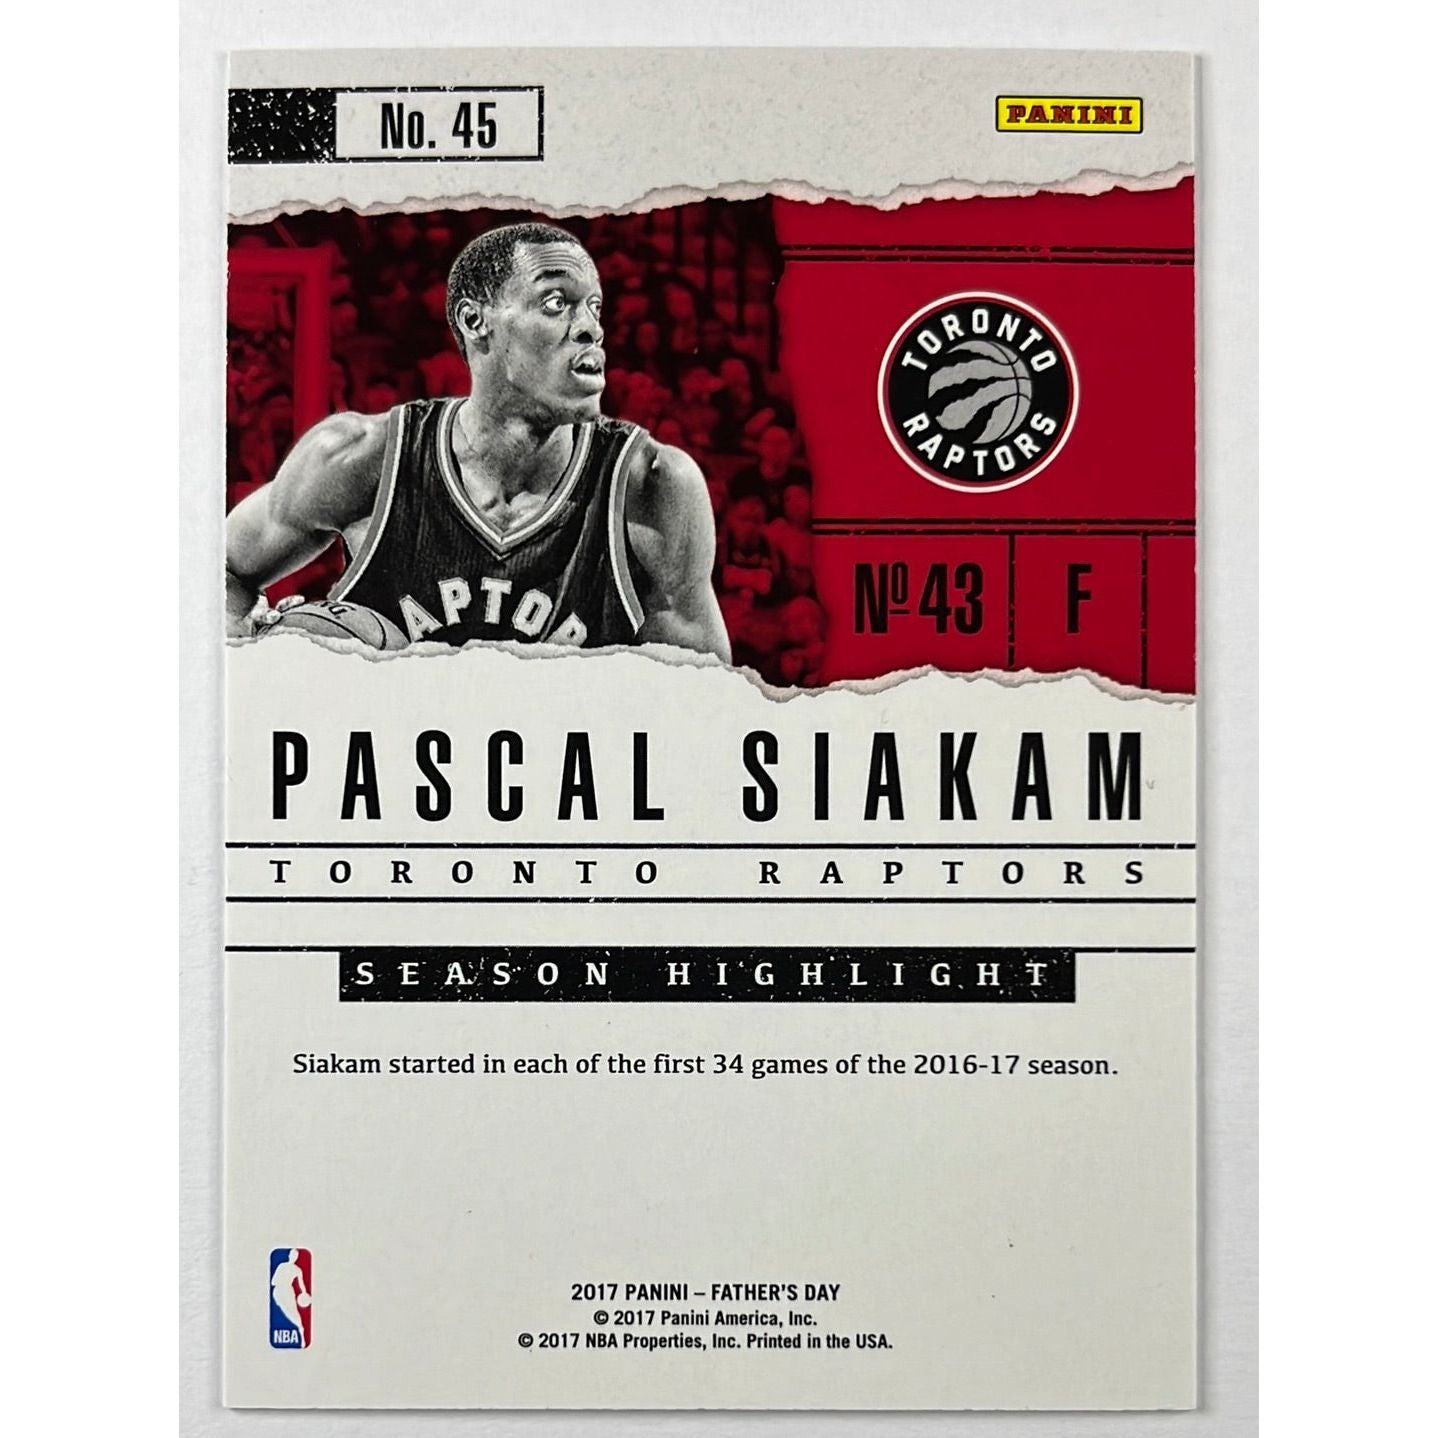 2017 Panini Fathers Day Pascal Siakam Red Galactic Foil Rookie Card /10